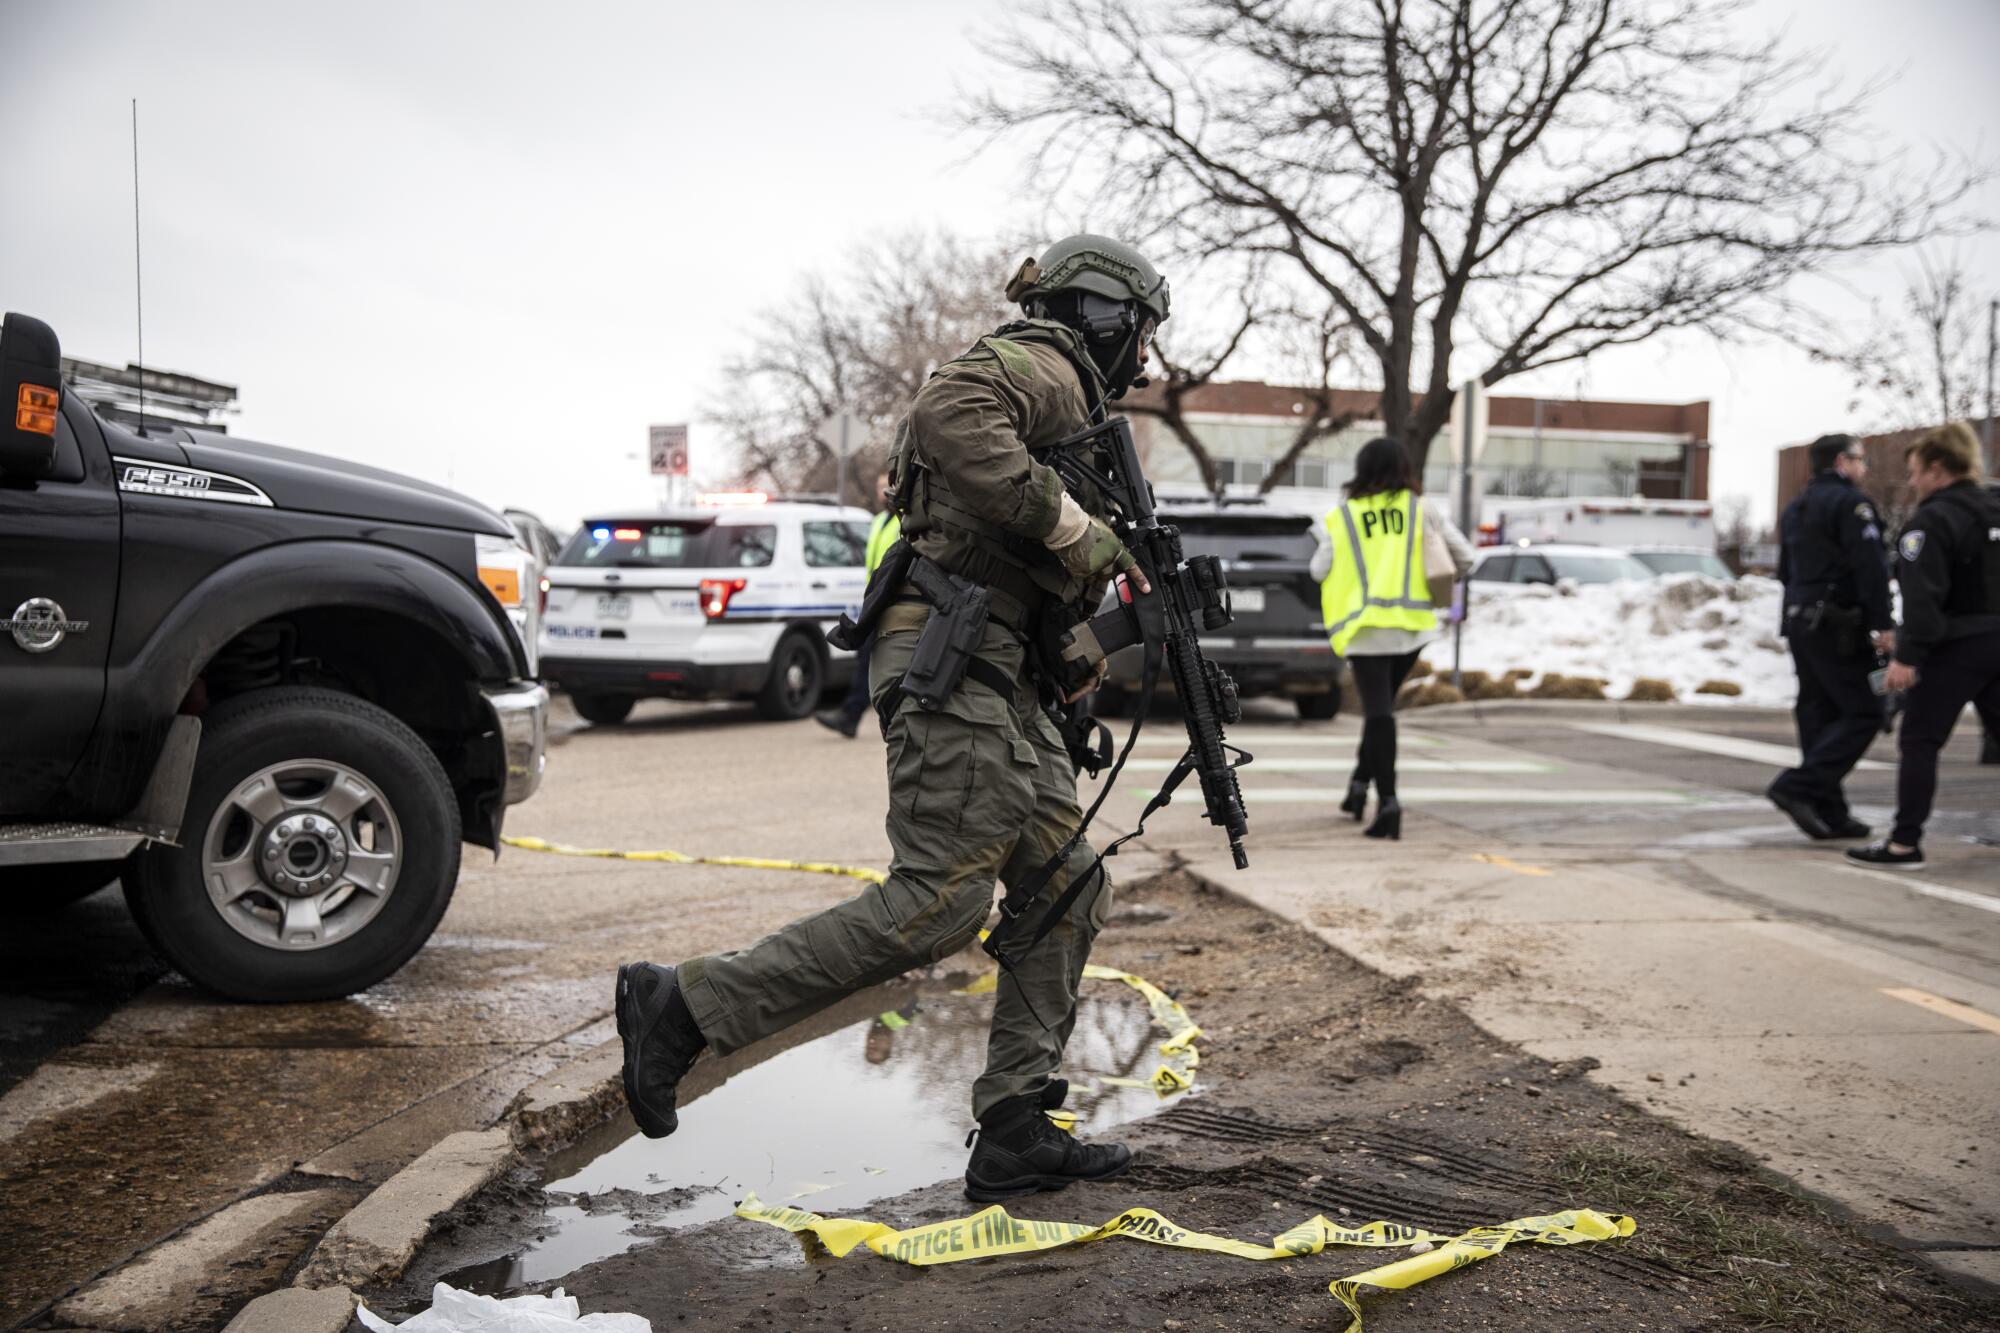 A SWAT team member runs toward a King Soopers grocery store where a gunman opened fire on March 22, 2021 in Boulder